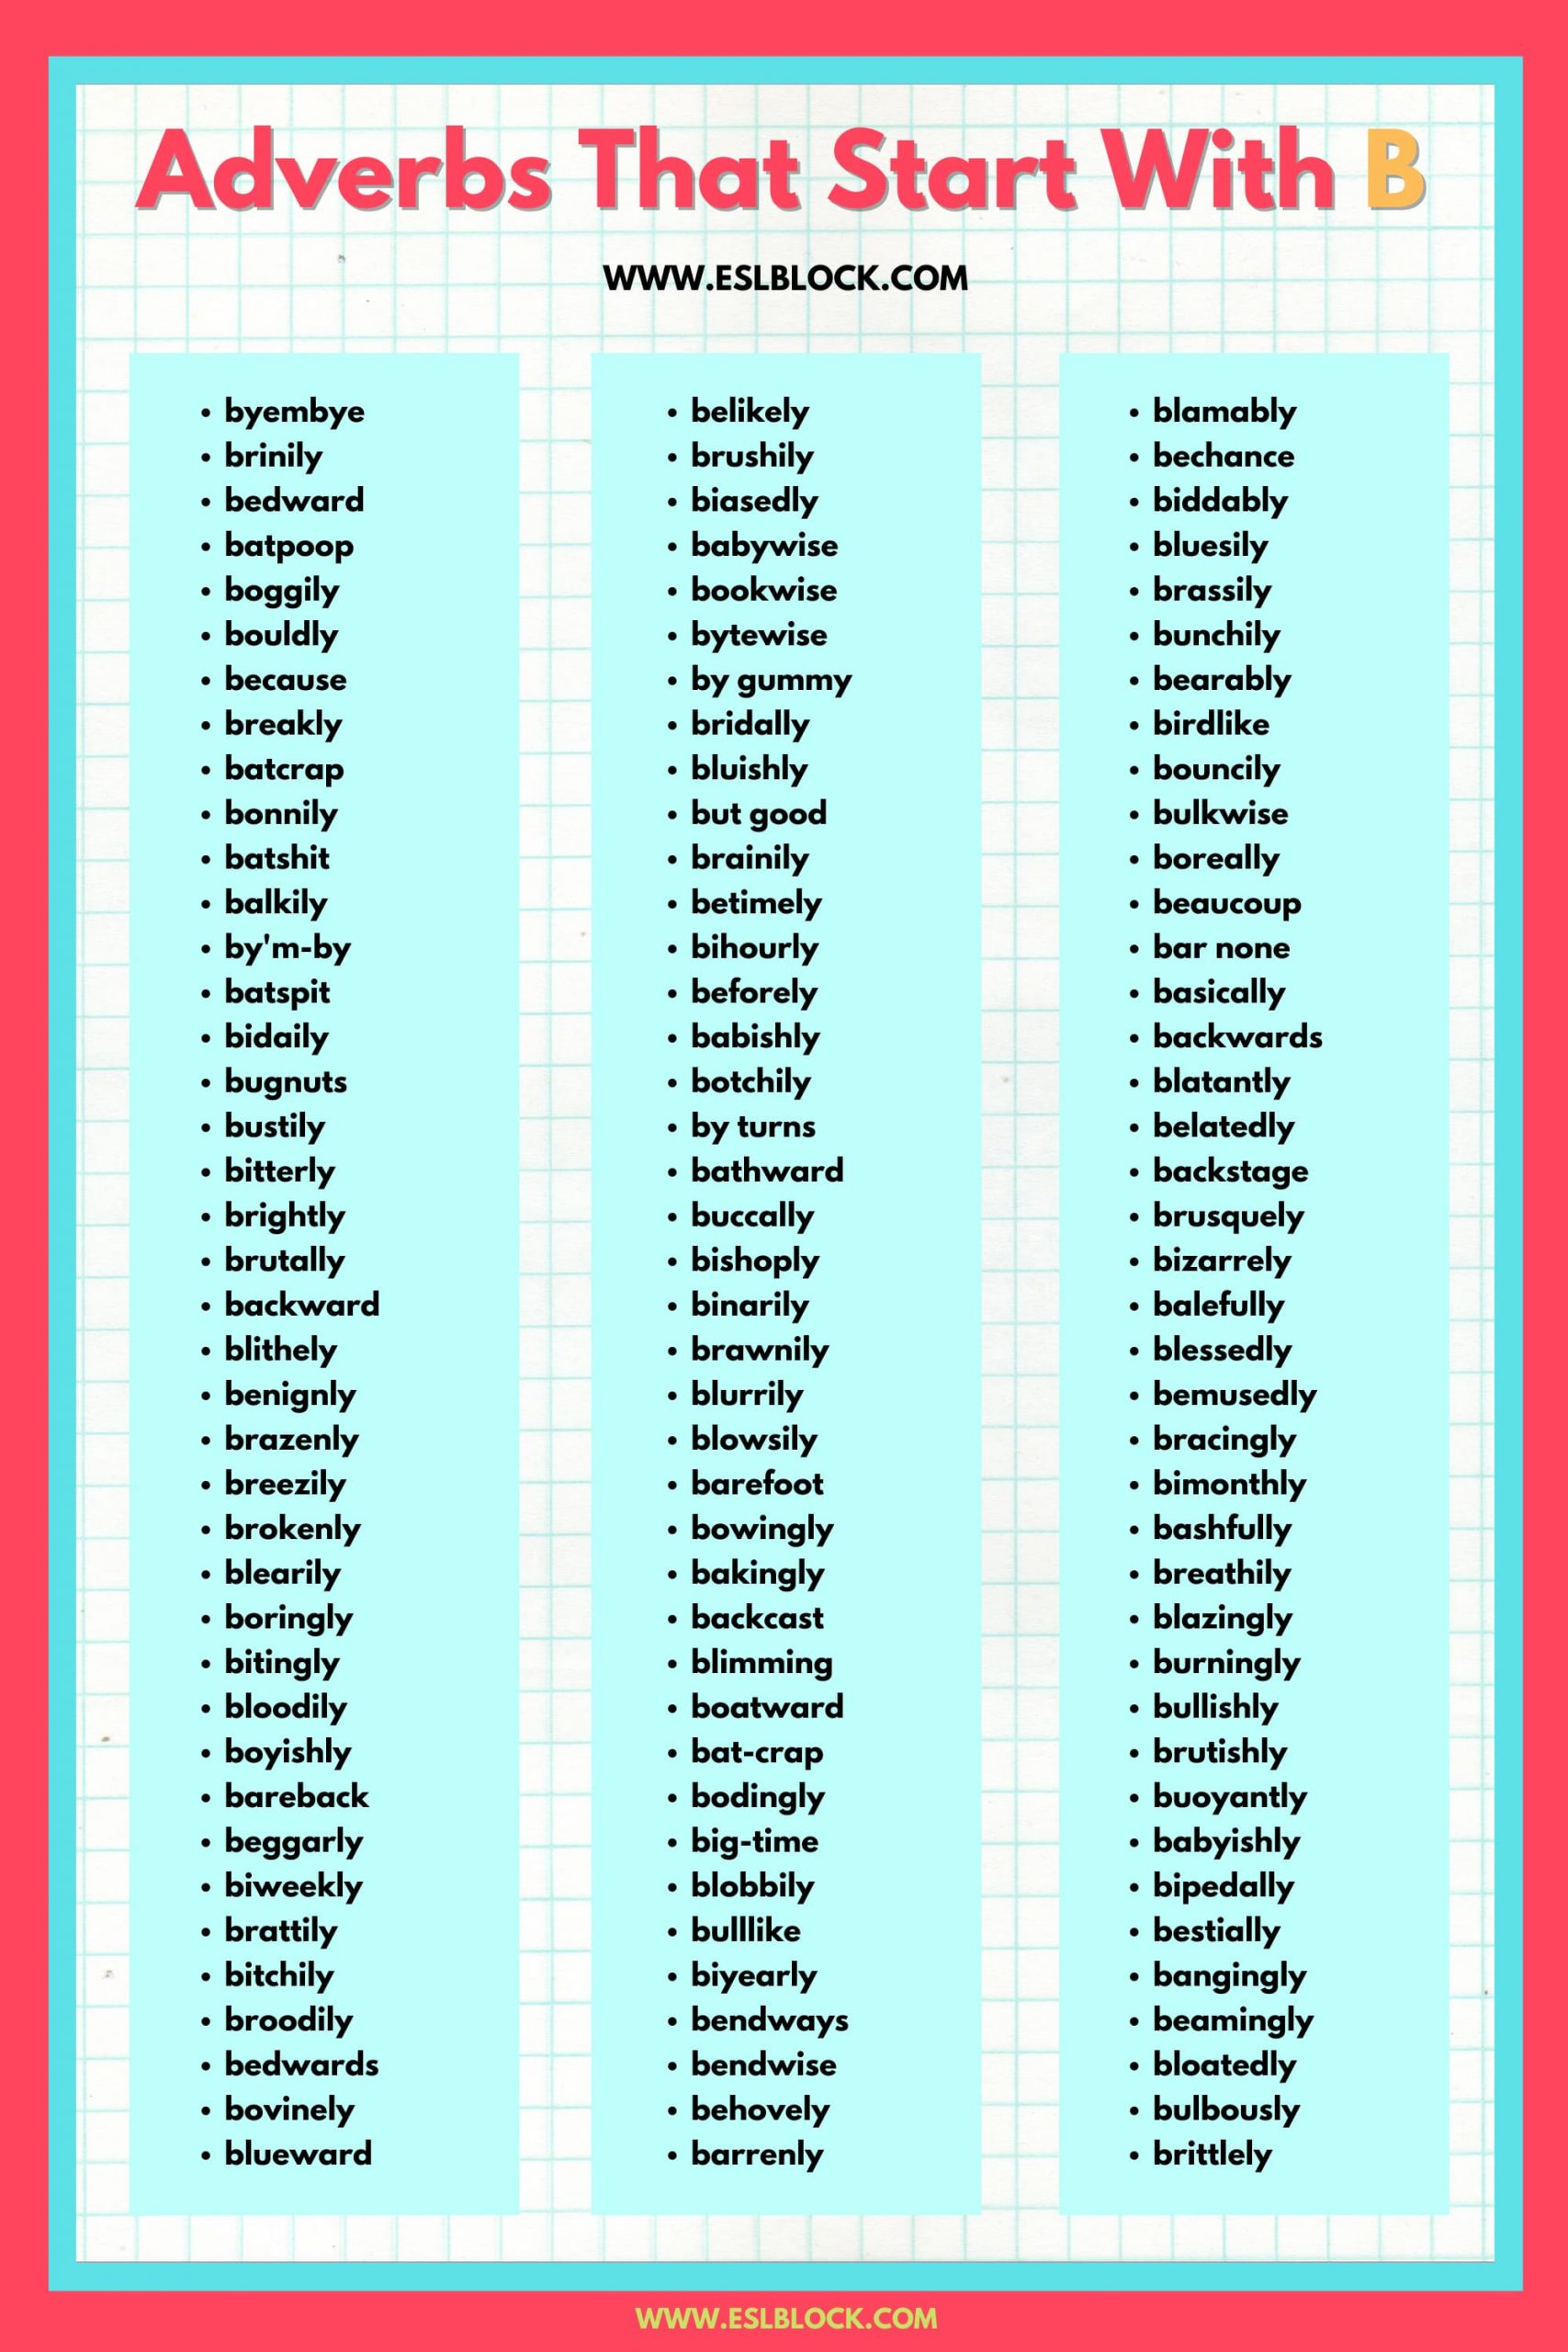 100 Example Sentences Using Adverbs, 4 Letter Adverbs That Start with B, 4 Letter Words, 5 Letter Adverbs That Start with B, 5 Letter Words, 6 Letter Adverbs That Start with B, 6 Letter Words, A to Z Adverbs, AA Adverbs, Adverb vocabulary words, Adverbs, Adverbs That Start with B, Adverbs with Example Sentences, All Adverbs, Types of Adverbs, Types of Adverbs with Example Sentences, Vocabulary, What are Adverbs, What are the types of Adverbs, Words That with B